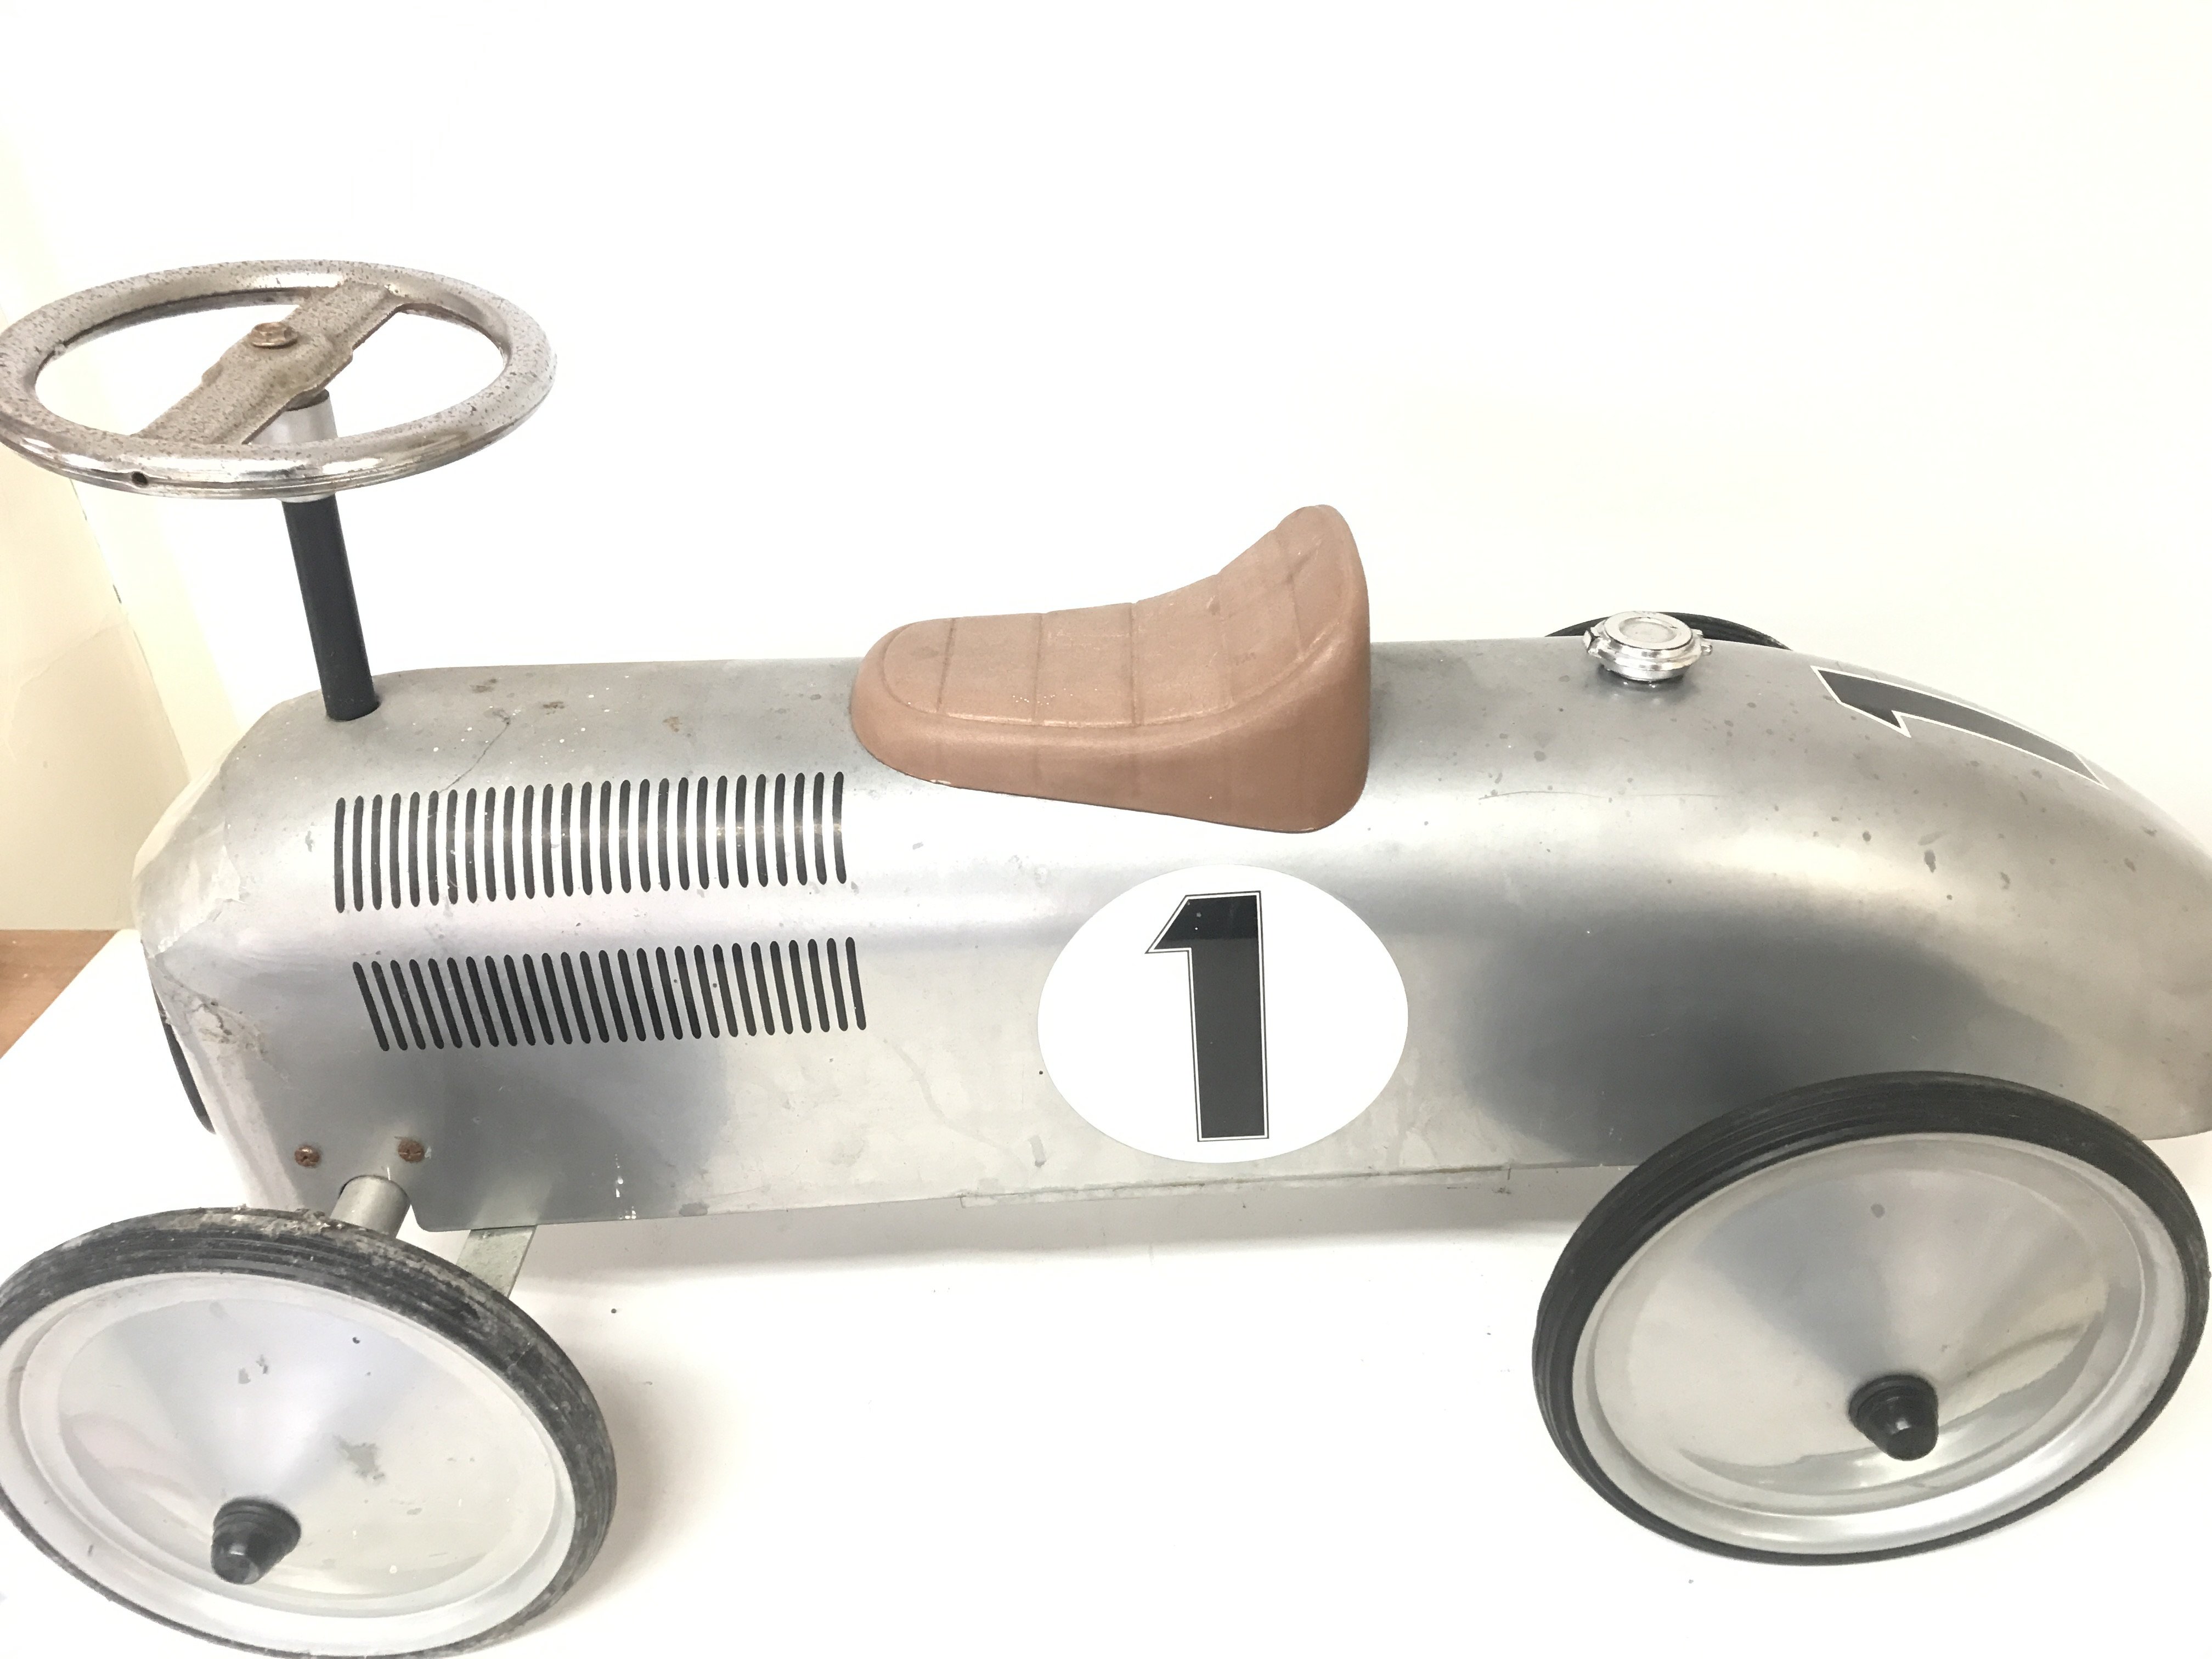 A Child's Metal Toy Pedal Car approx length 76 cm - Image 2 of 2